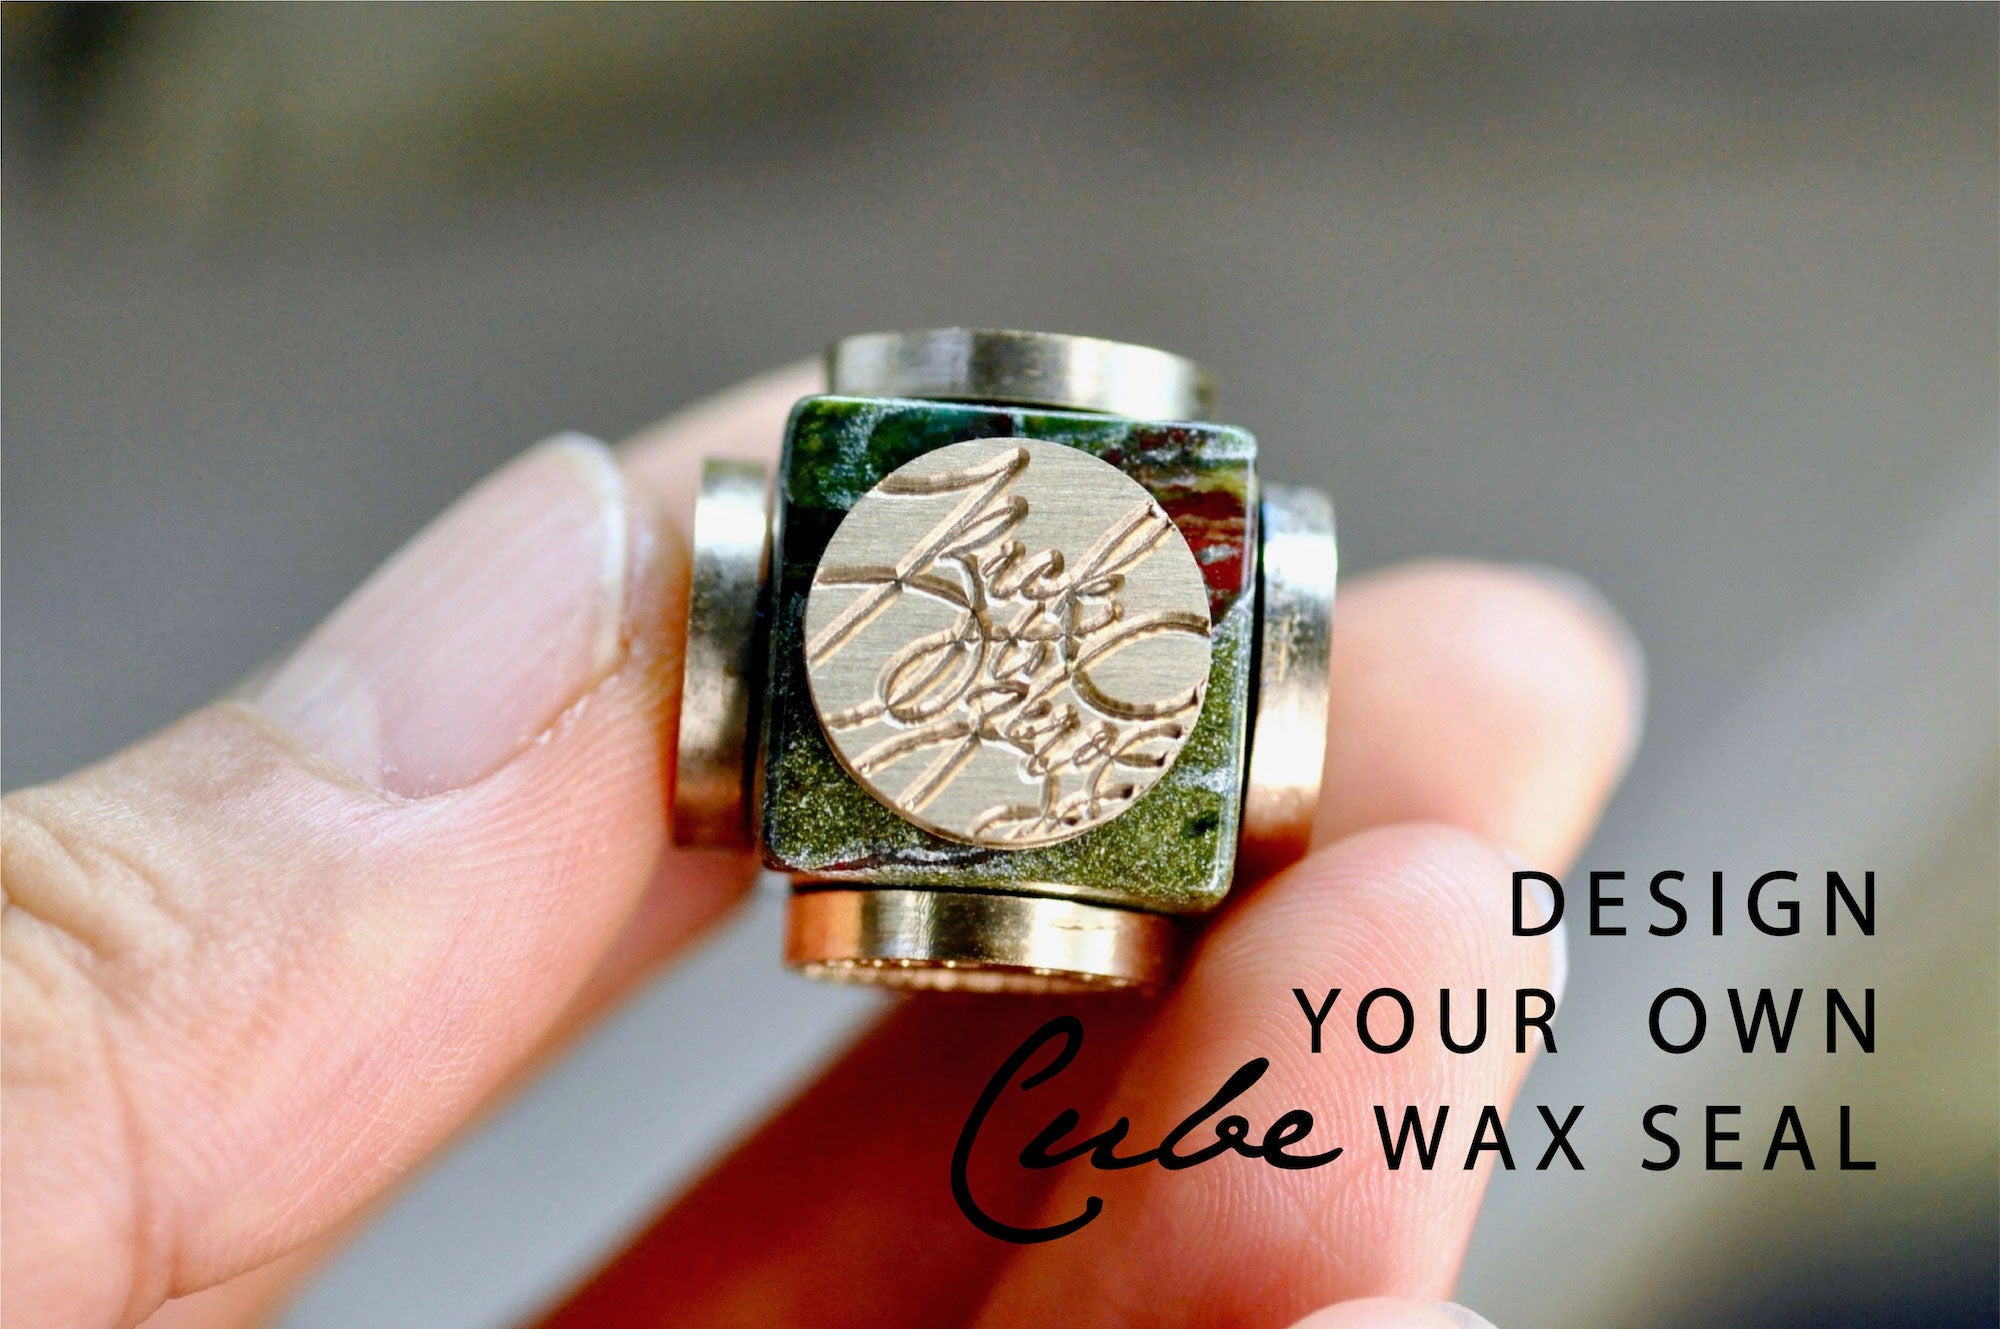 OOAK Design Your Own Cube Wax Seal | Dragon Bloodstone